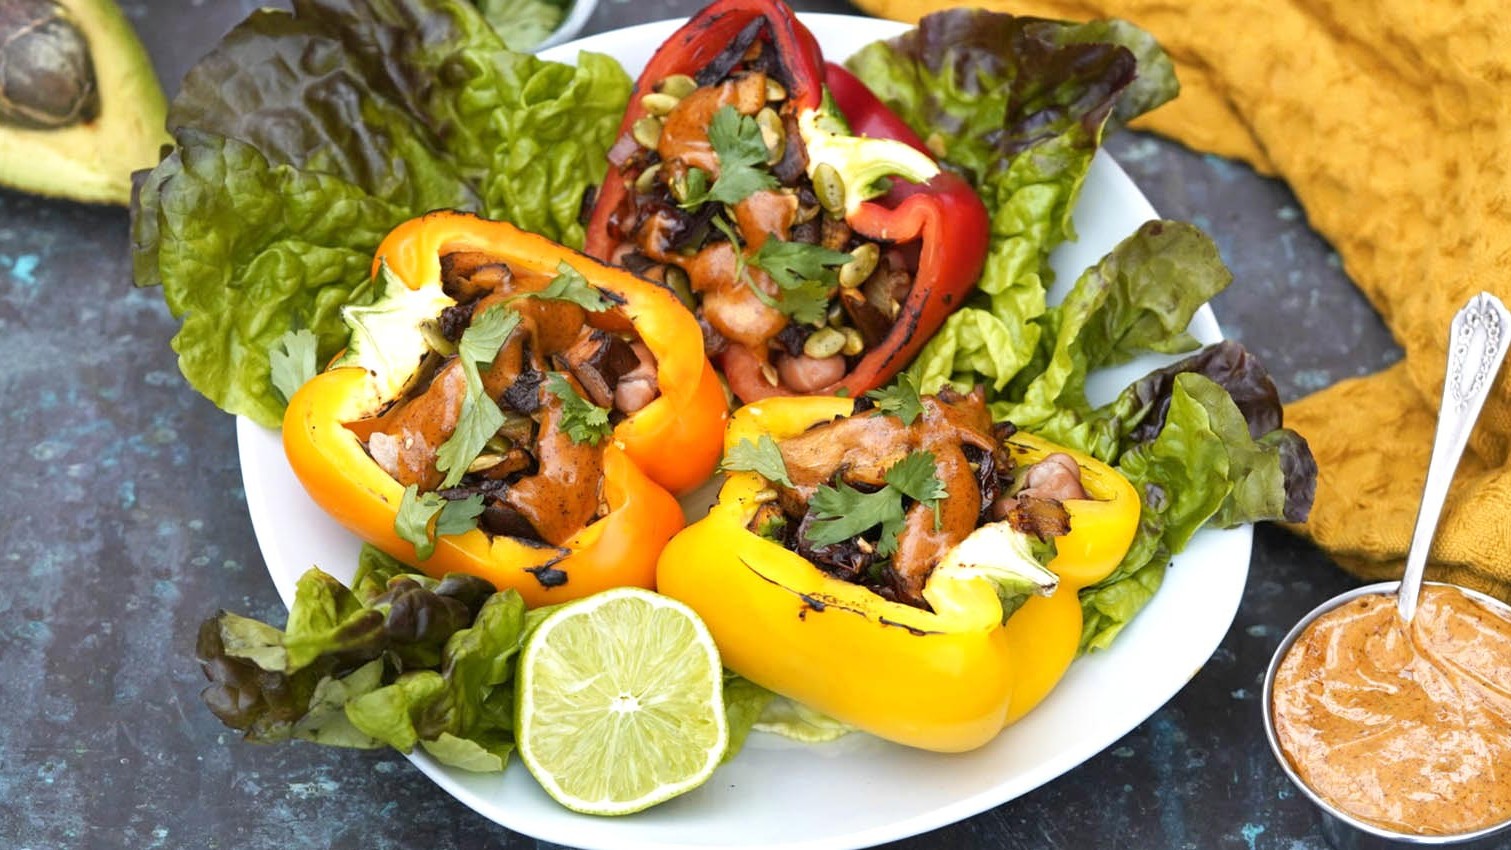 Image of Hemp Chipotle Aioli with Stuffed Bell Peppers | Vegan, Dairy-Free